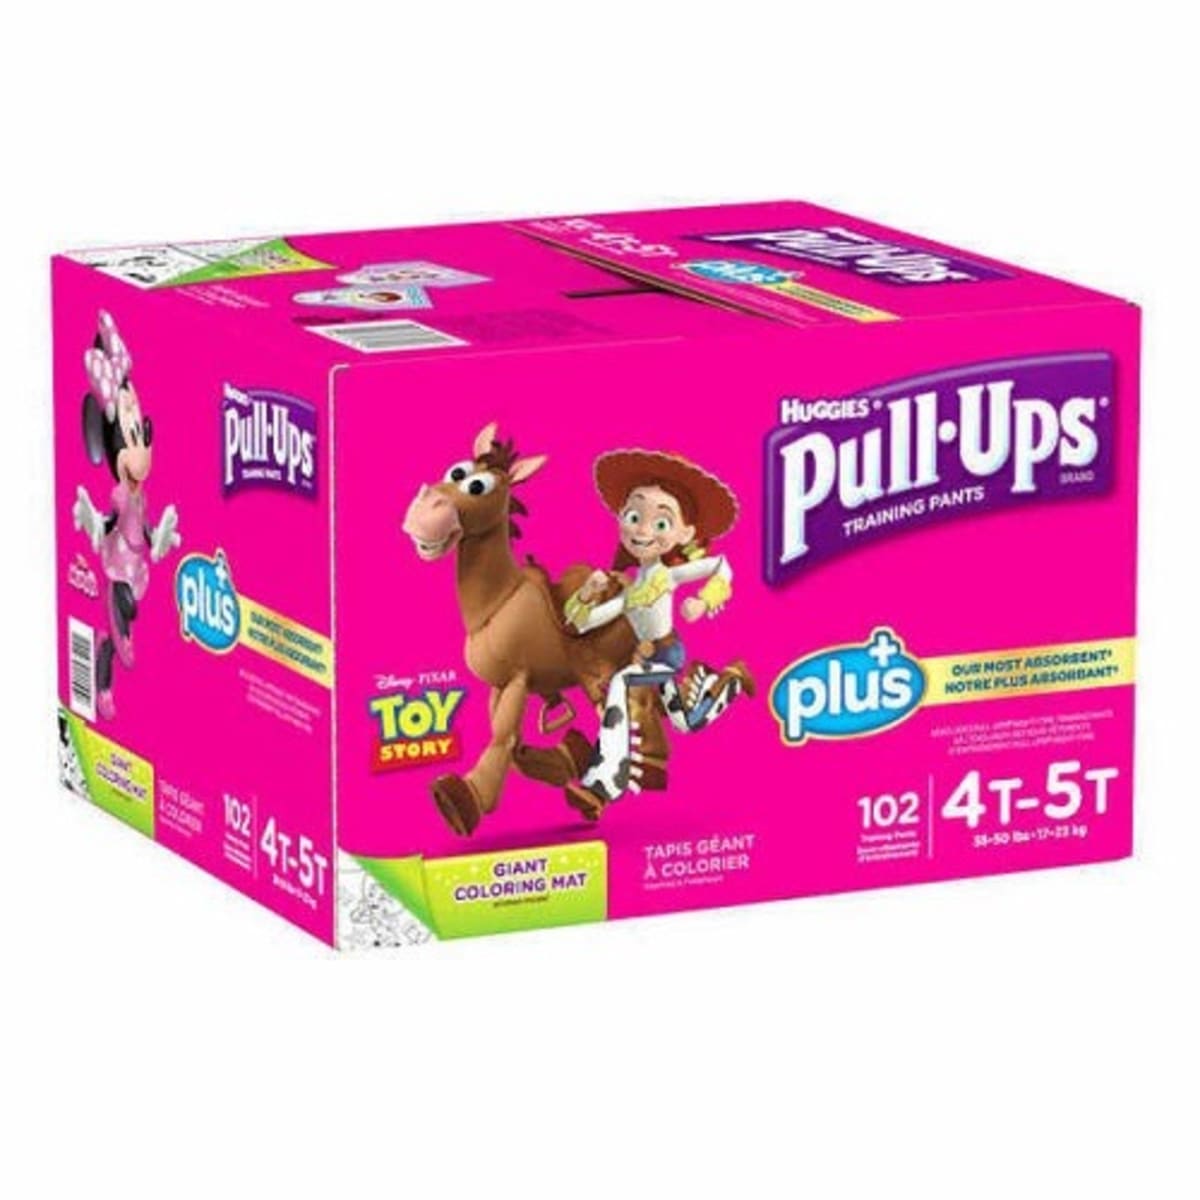 Huggies Pull Ups Training Diapers For Girls 4t-5t - 102 Count